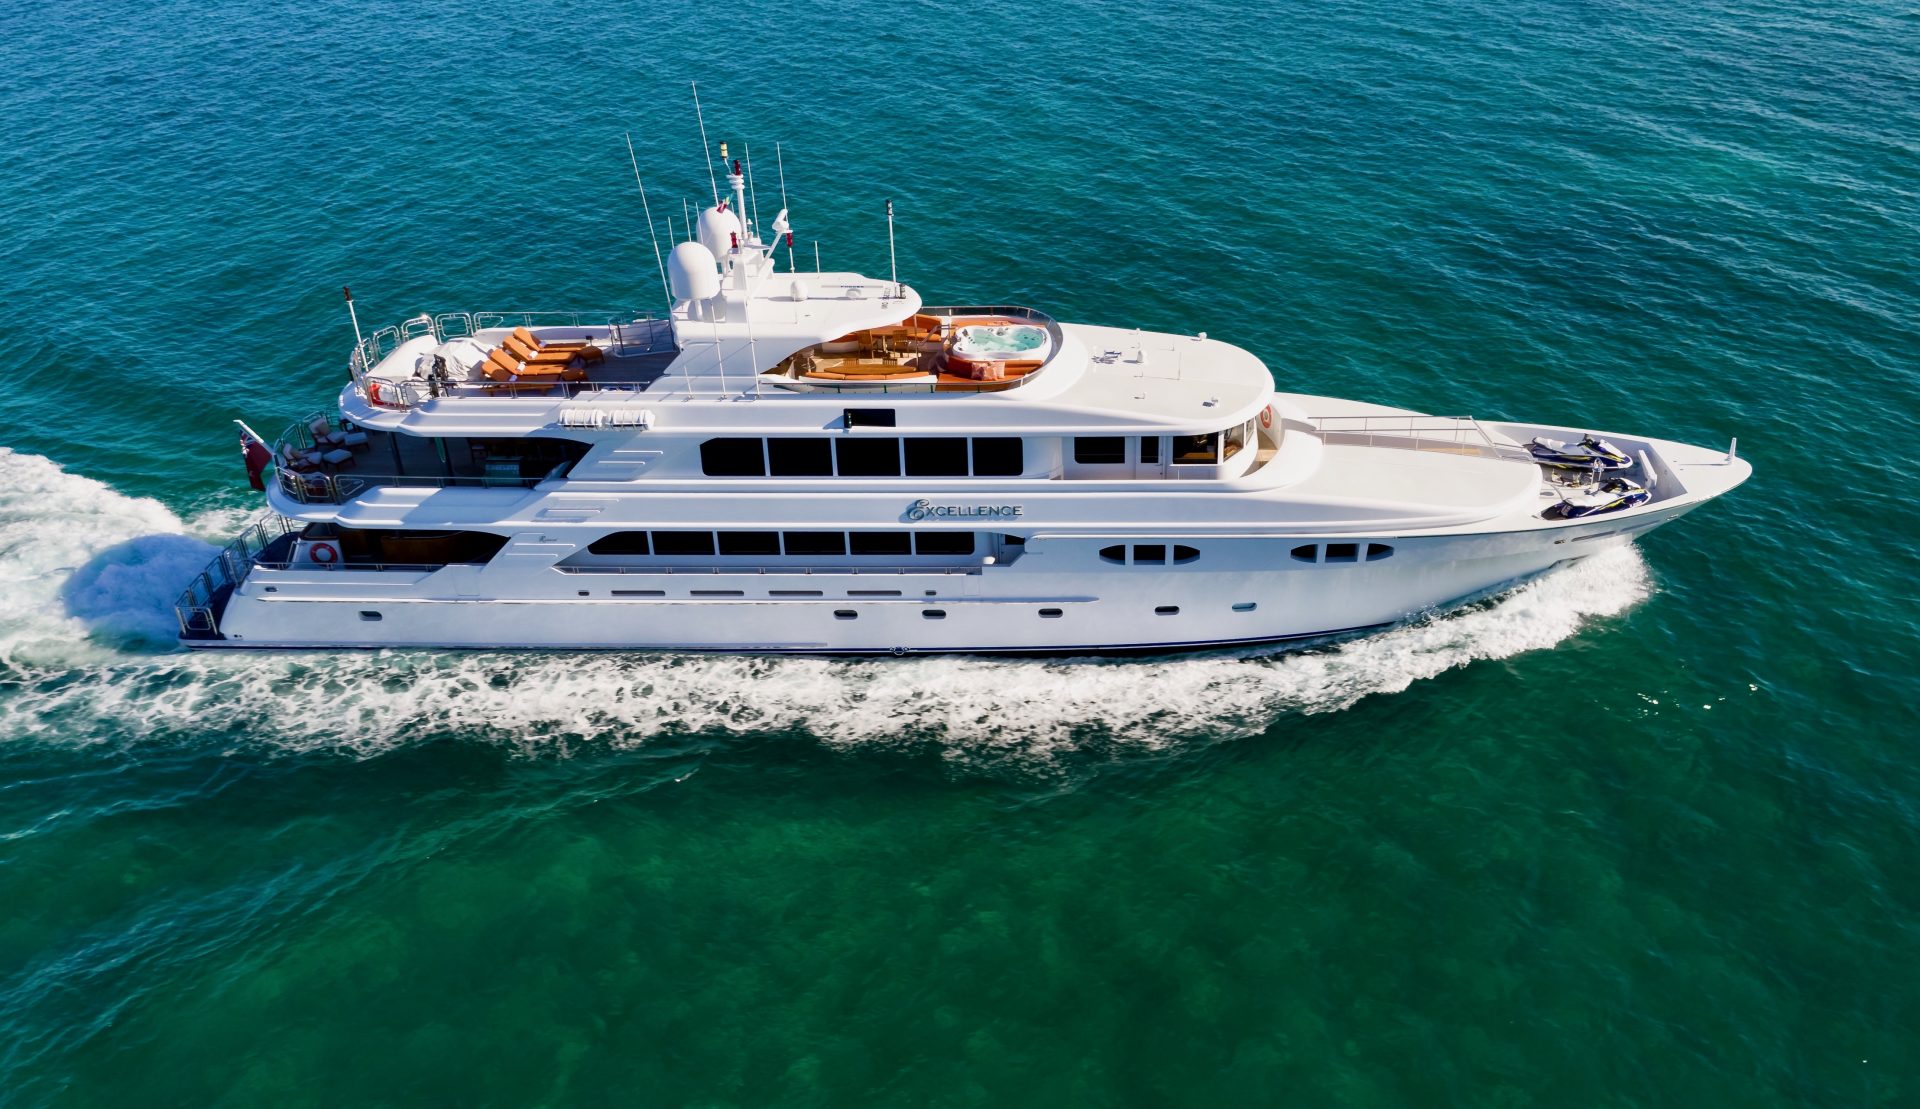 EXCELLENCE yacht Charter Brochure